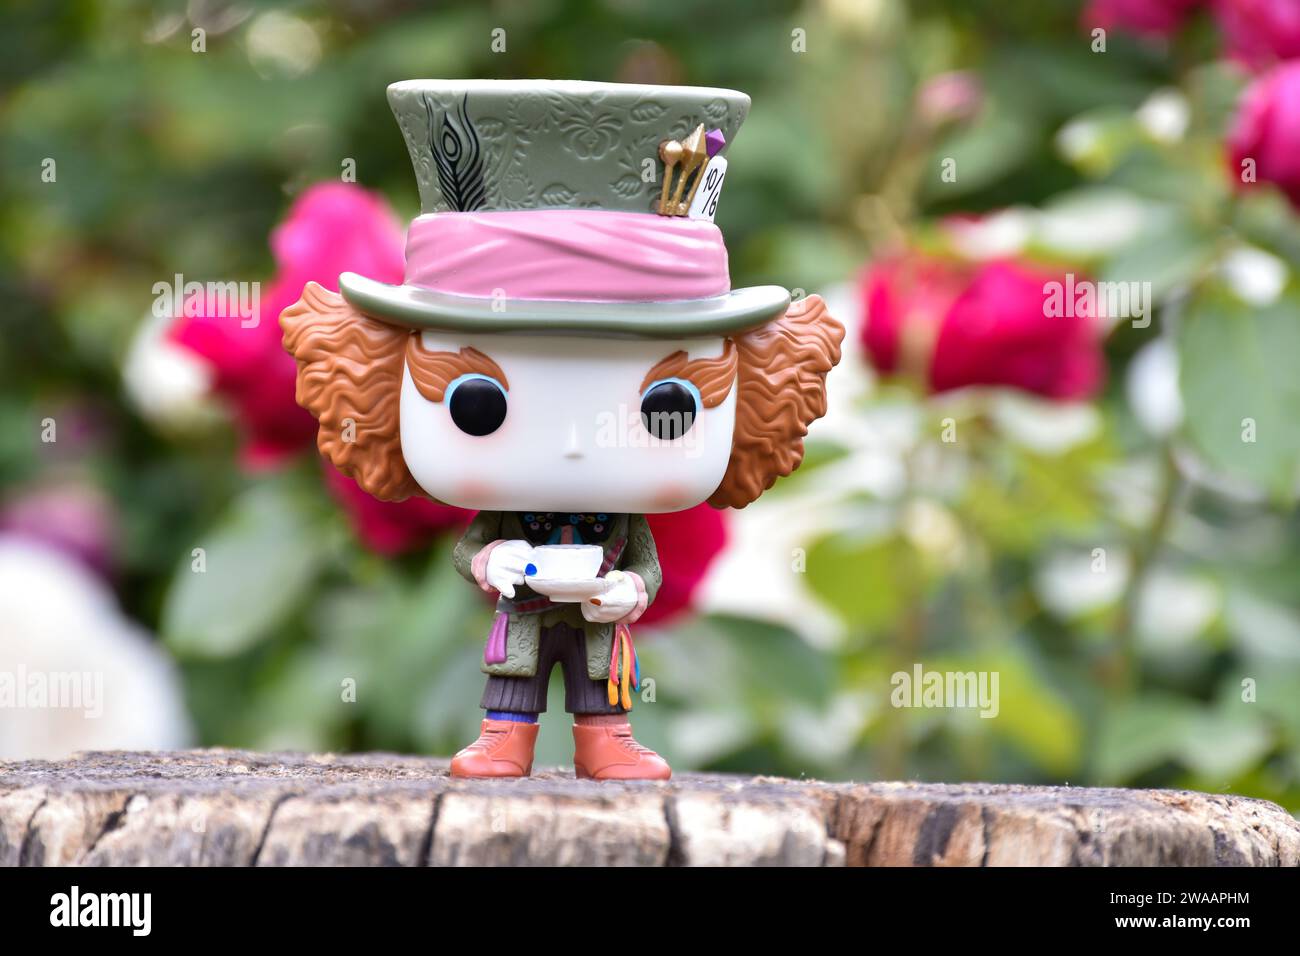 Funko Pop action figure of Mad Hatter from Tim Burton fantasy movie Alice in Wonderland. Red and white roses, green leaves, garden, wooden stump. Stock Photo